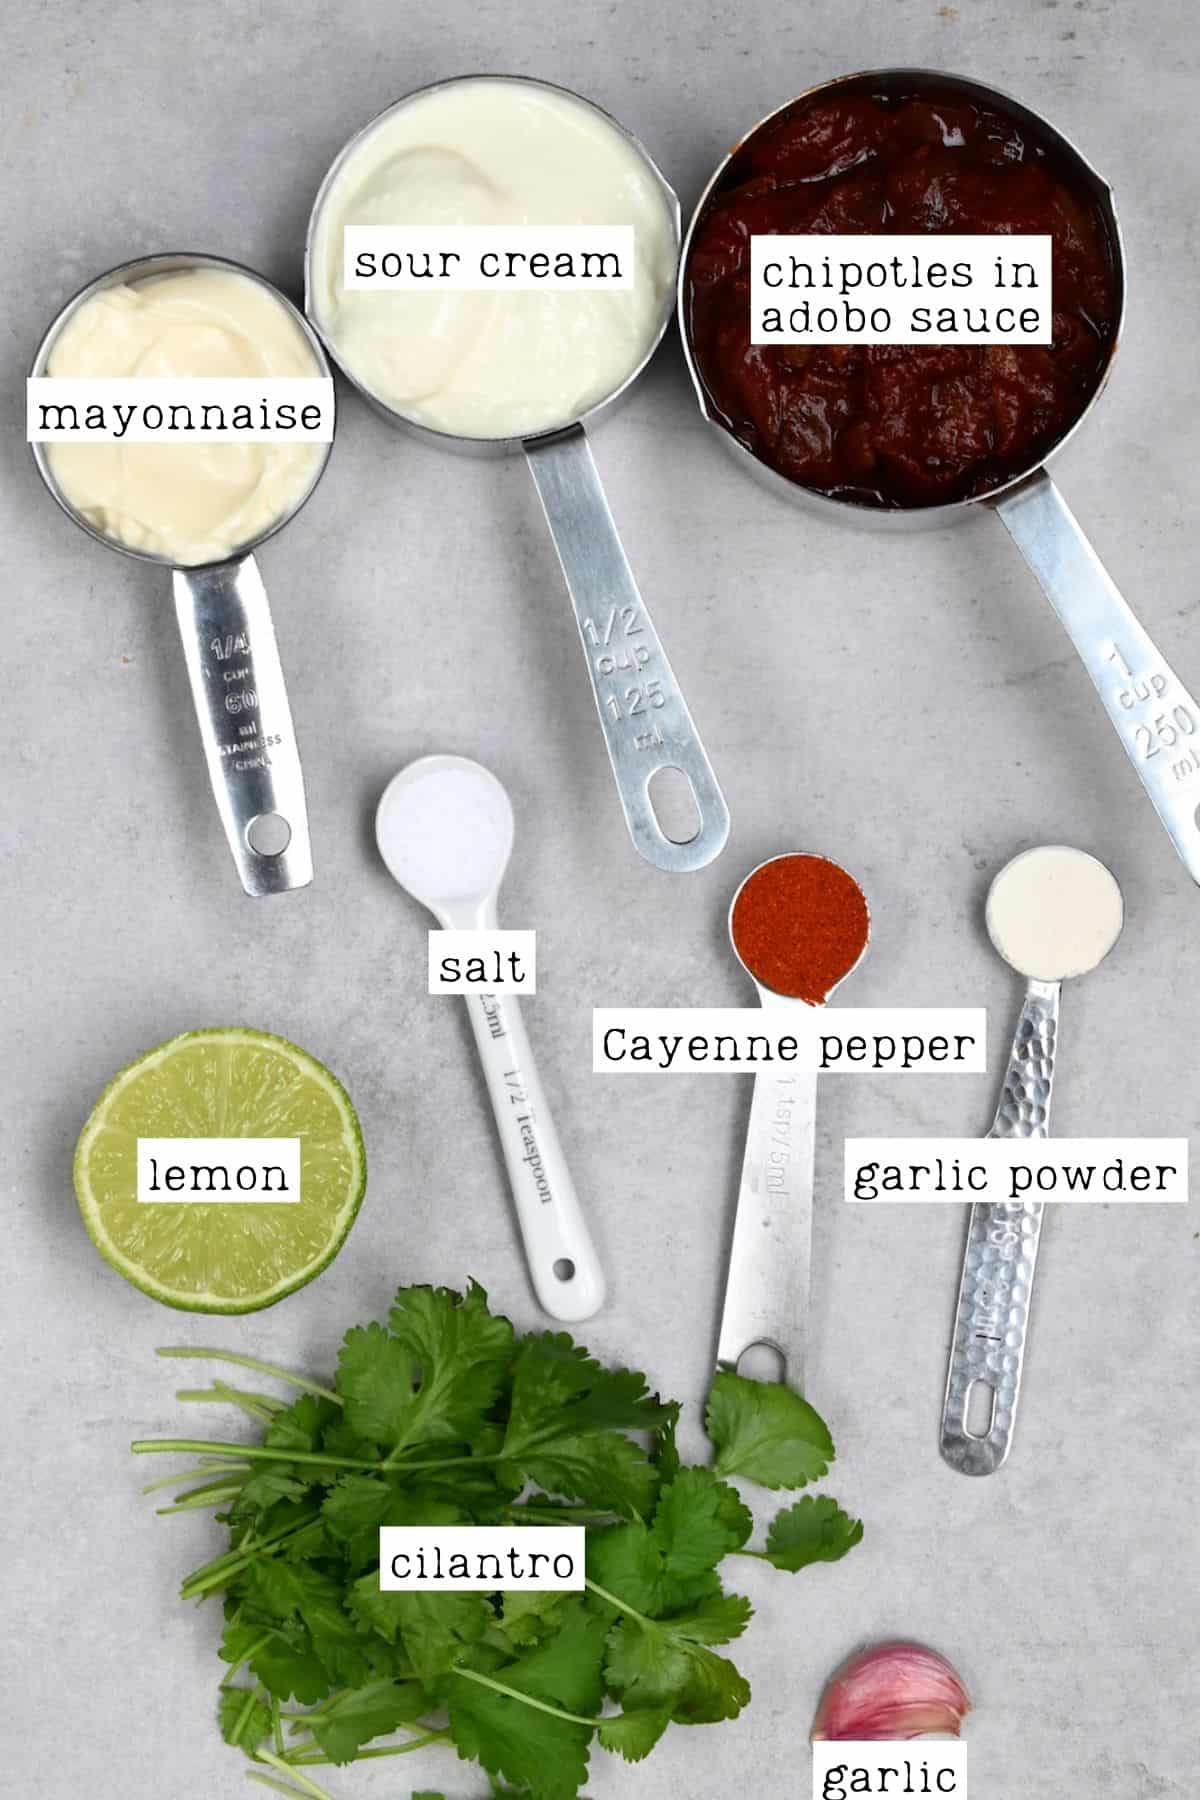 Ingredients for chipotle sauce